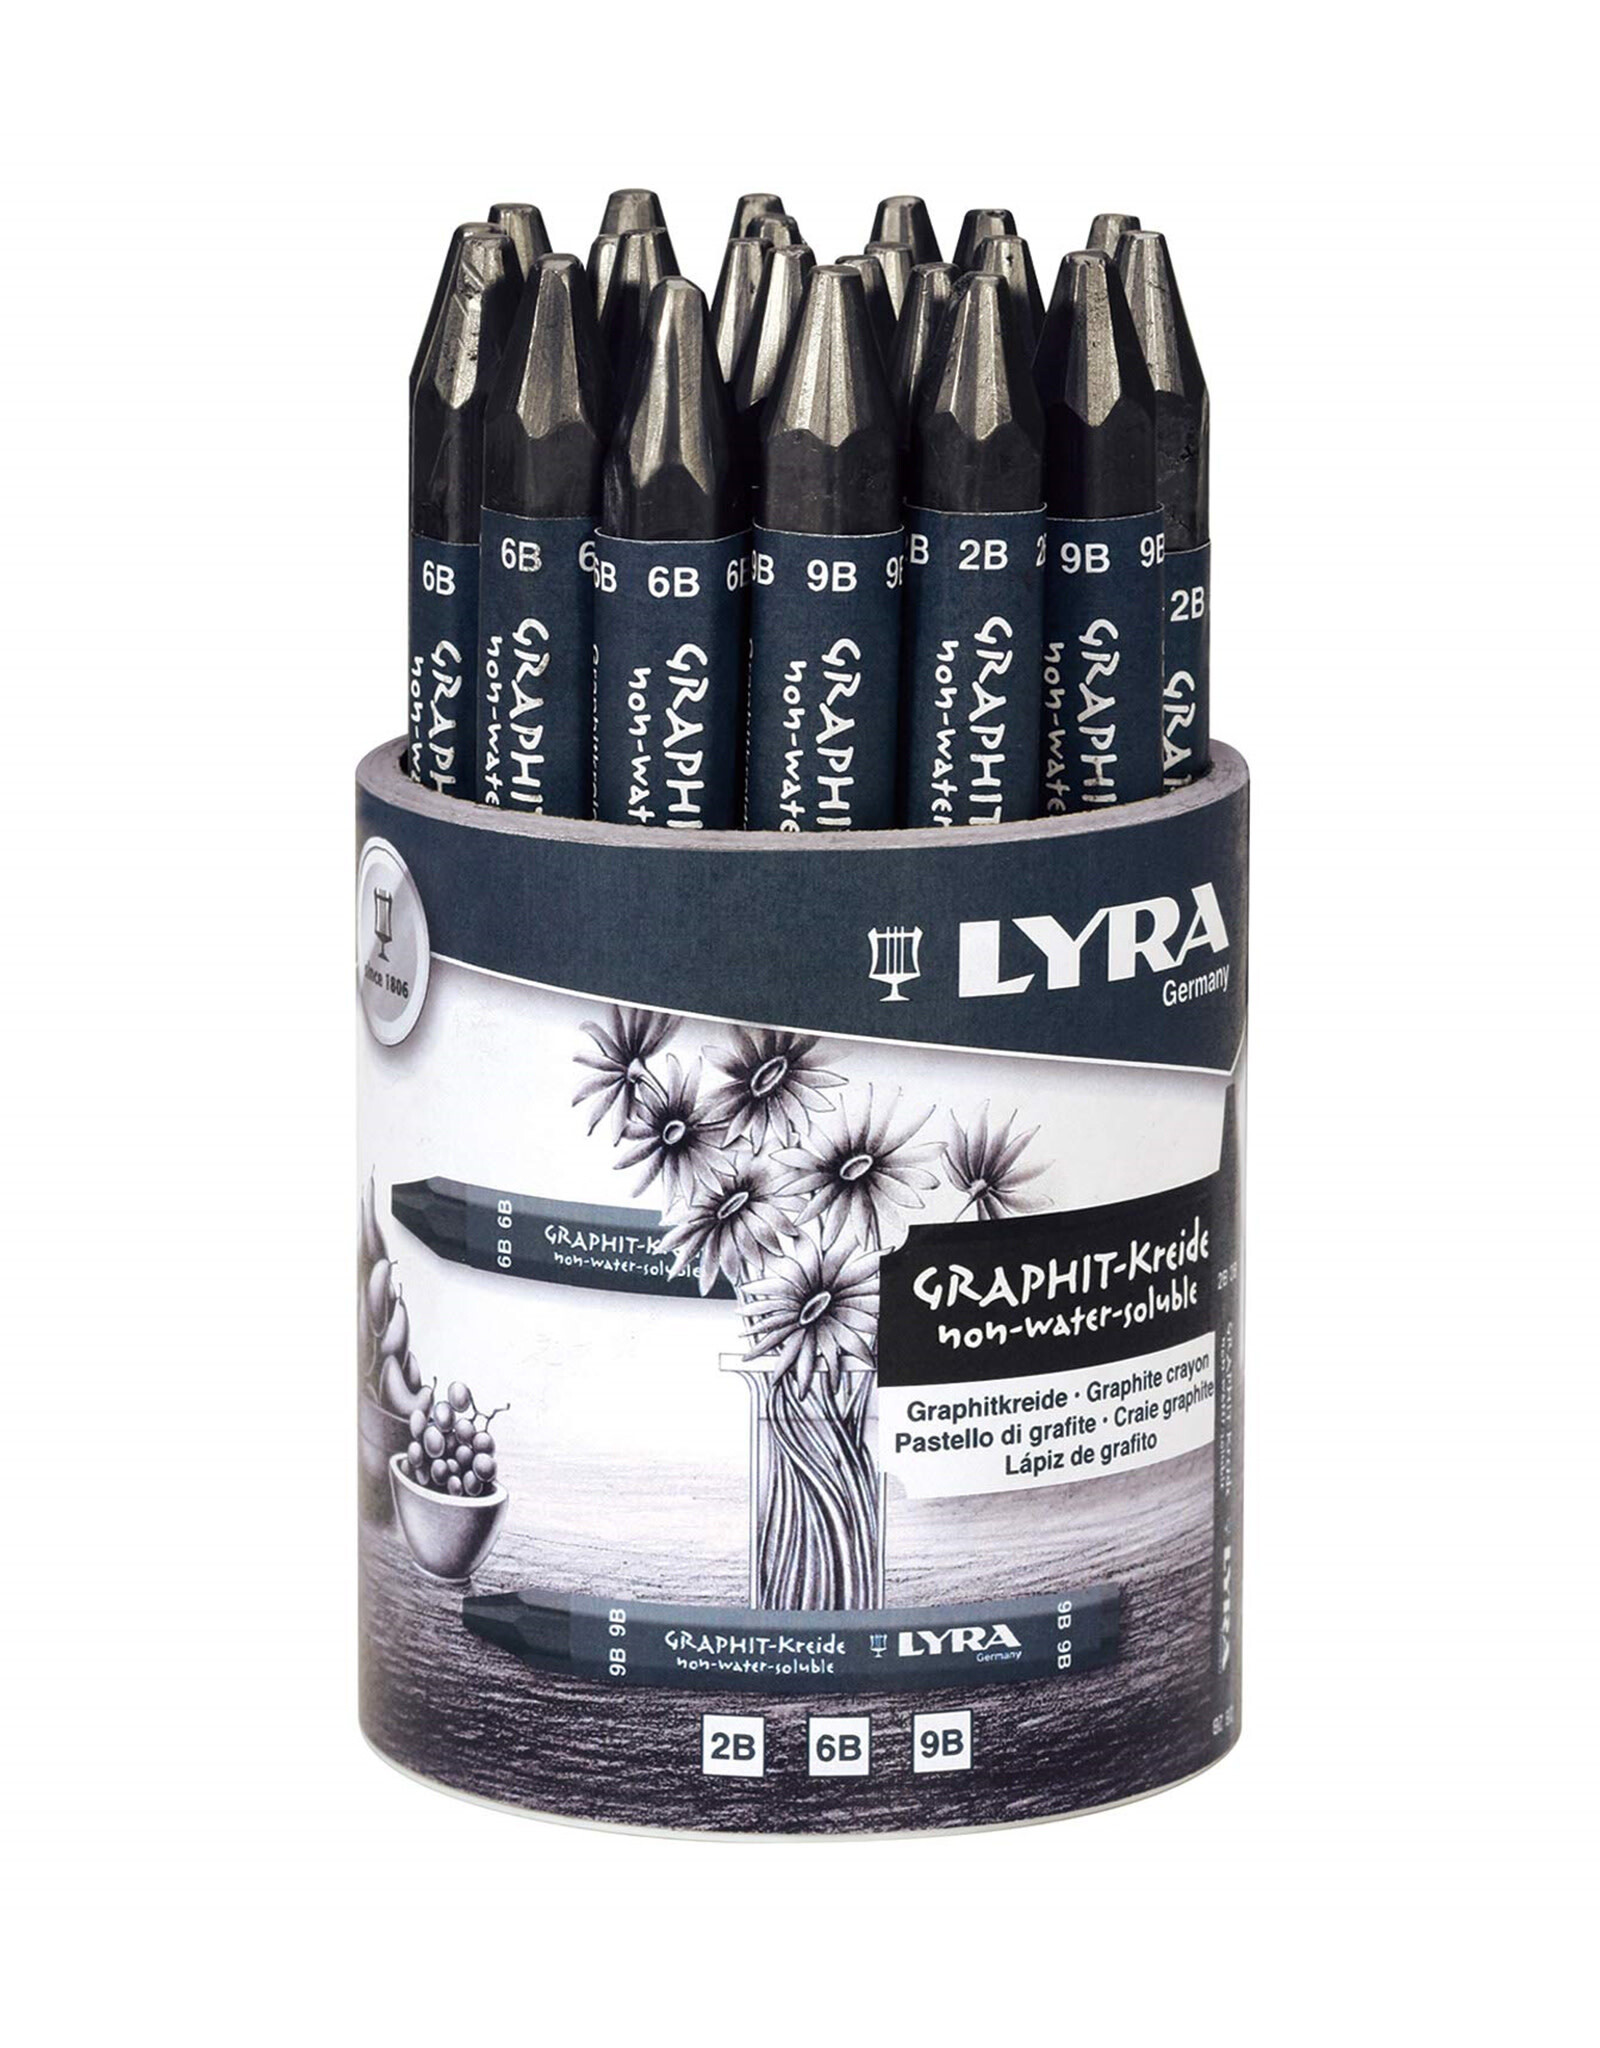 CLEARANCE Lyra Graphite Crayons Set of 24 Durable 2B 6B and 9B Graphite  Sticks - The Art Store/Commercial Art Supply